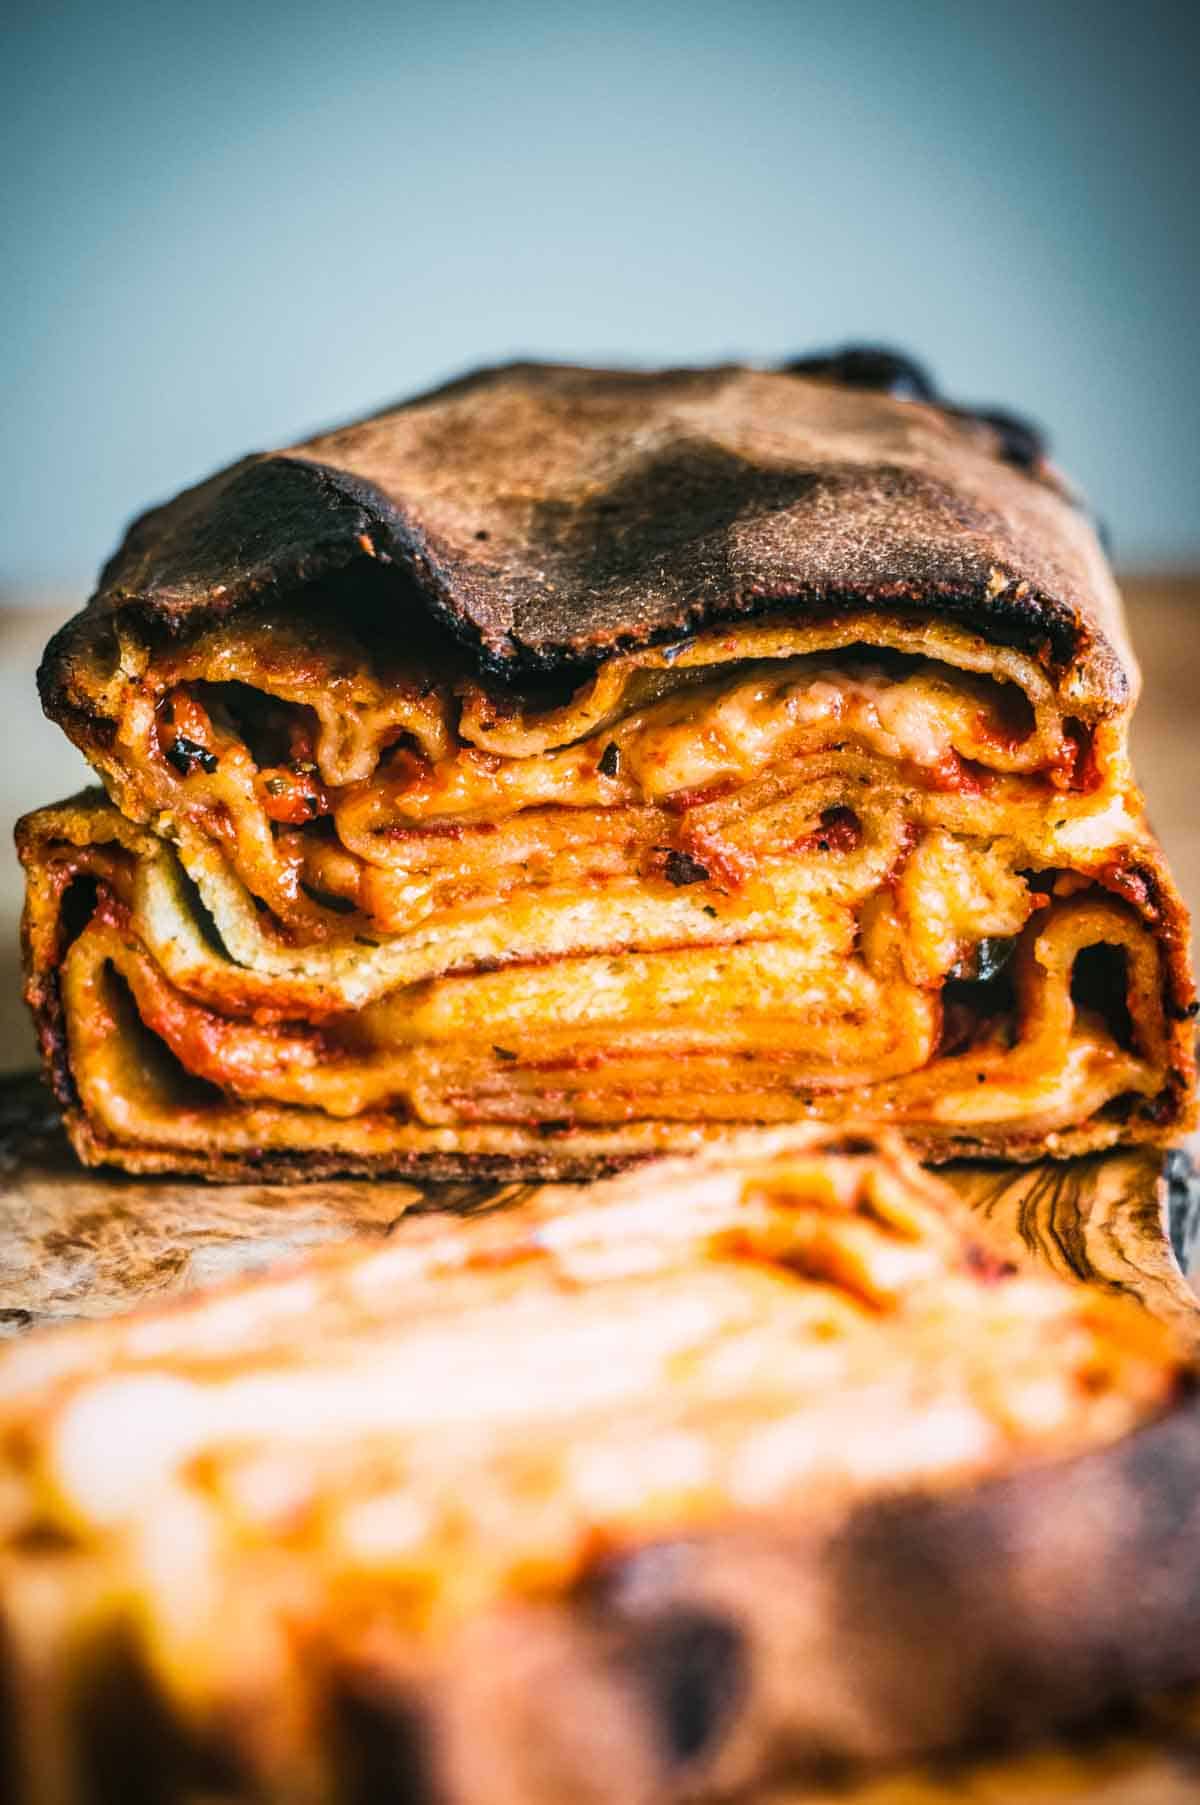 A loaf of local Sicilian bread from Ragusa cut in half to reveal the layers of sauce and cheese.